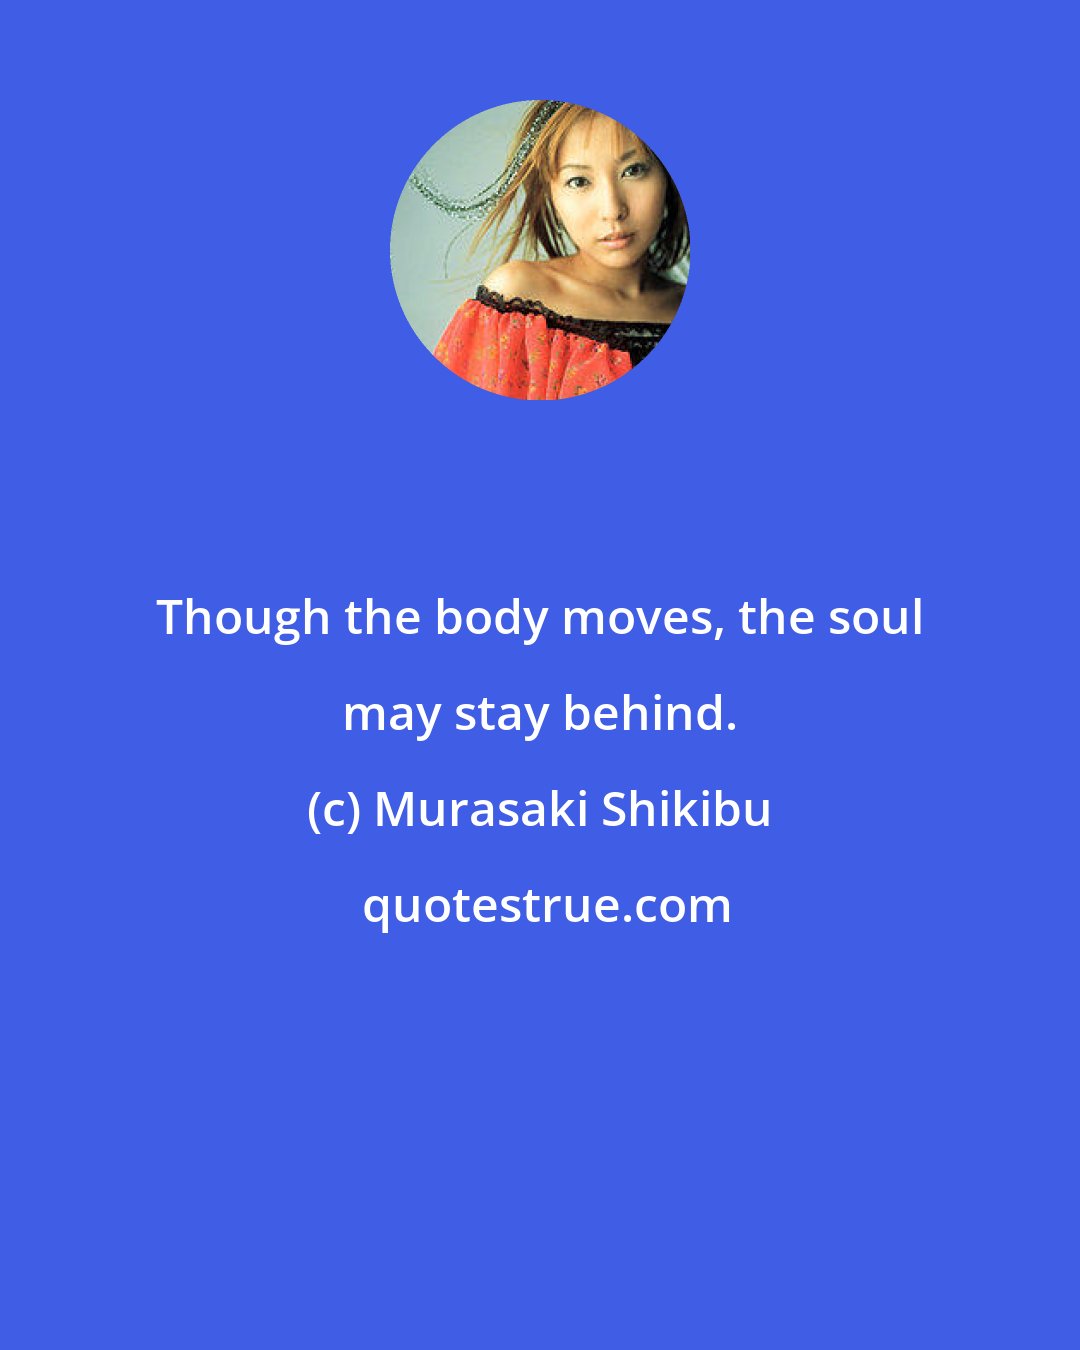 Murasaki Shikibu: Though the body moves, the soul may stay behind.